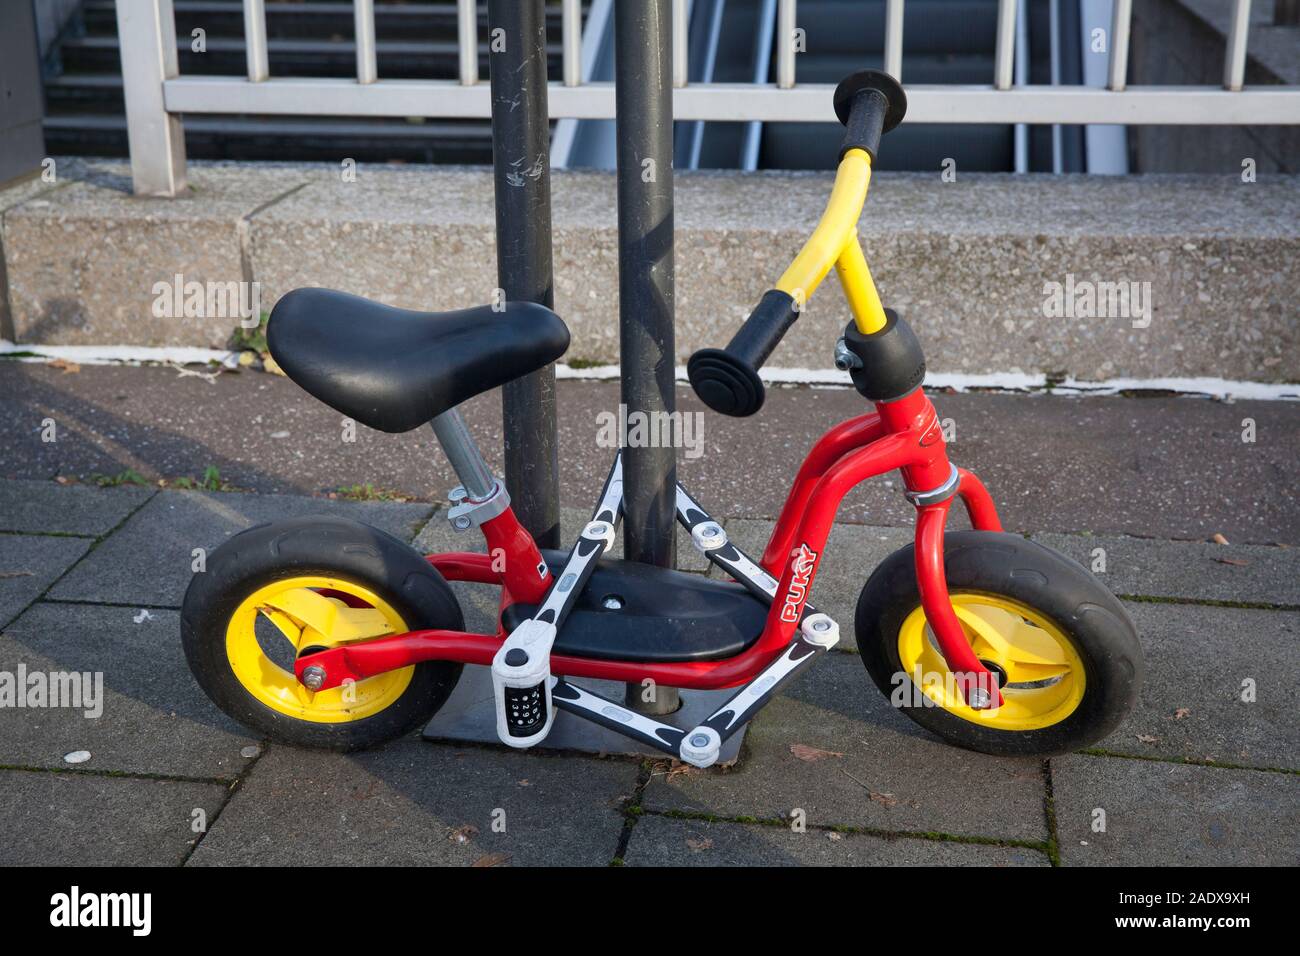 Kinderfahrrad High Resolution Stock Photography and Images - Alamy